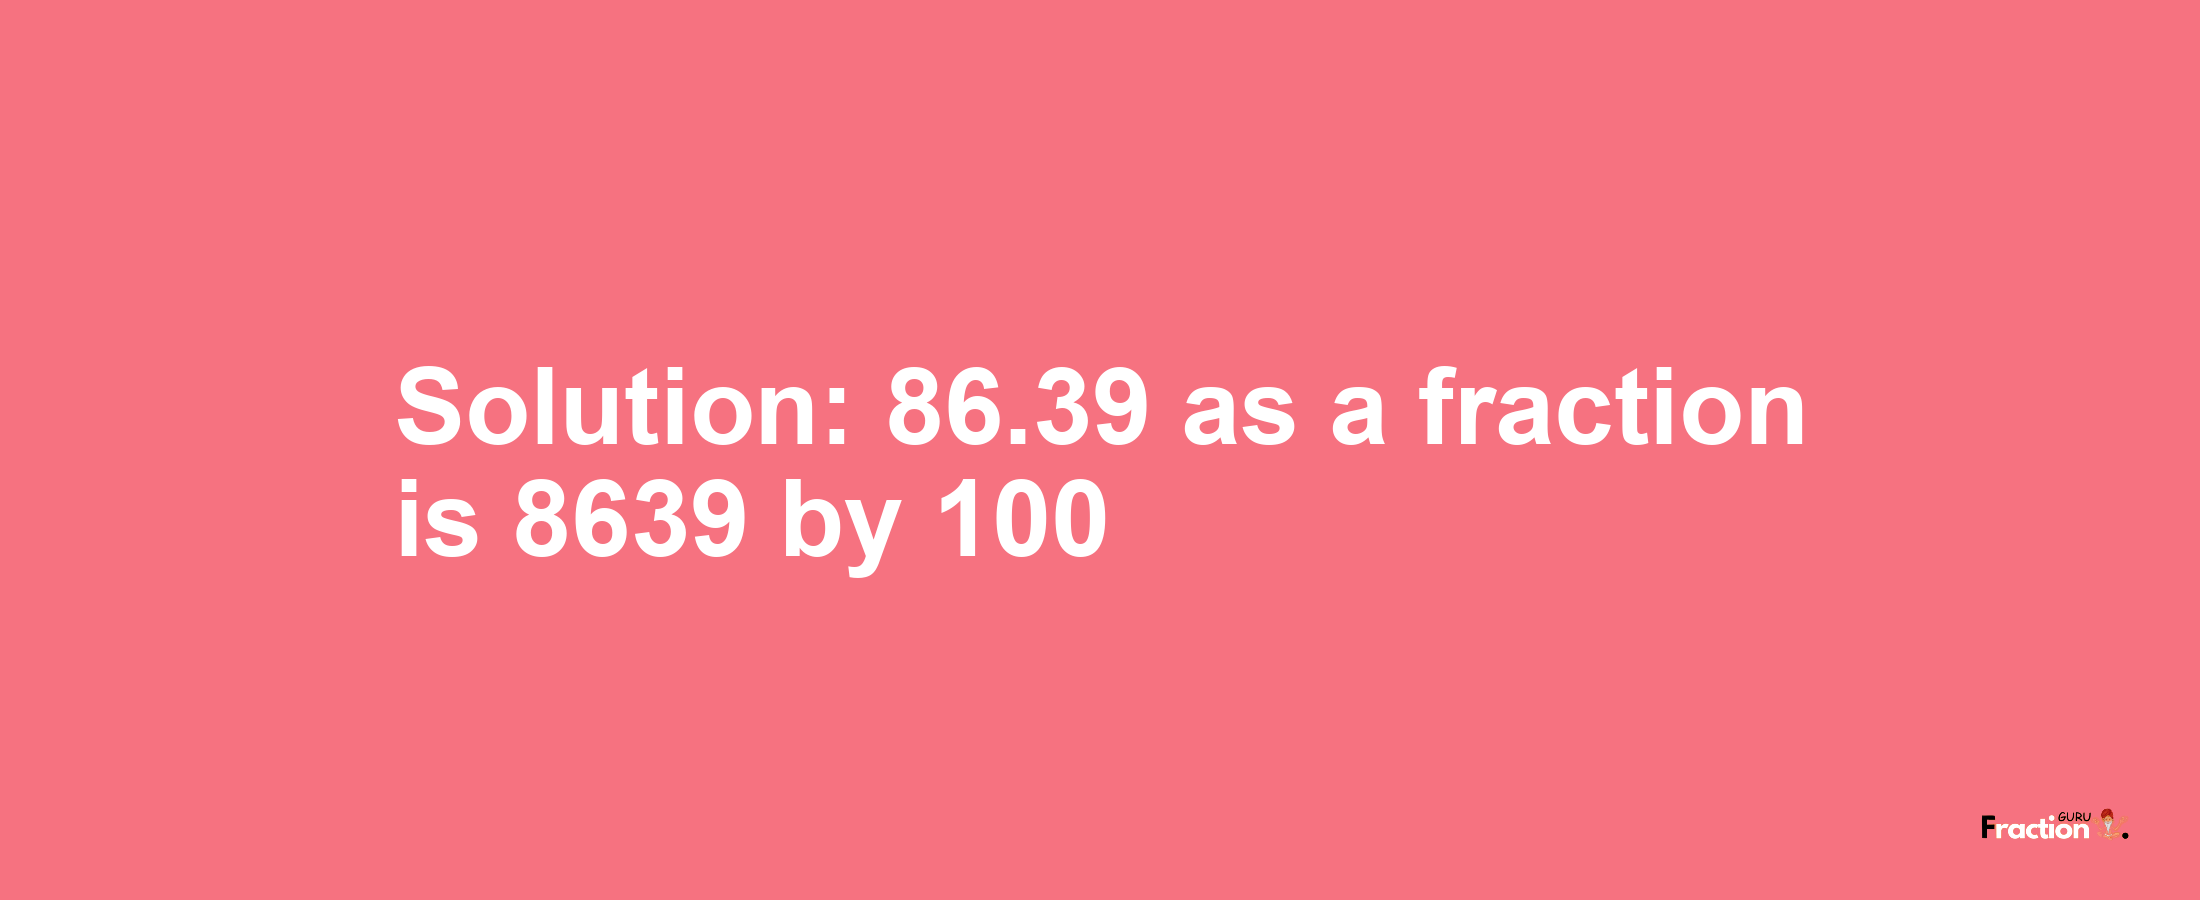 Solution:86.39 as a fraction is 8639/100